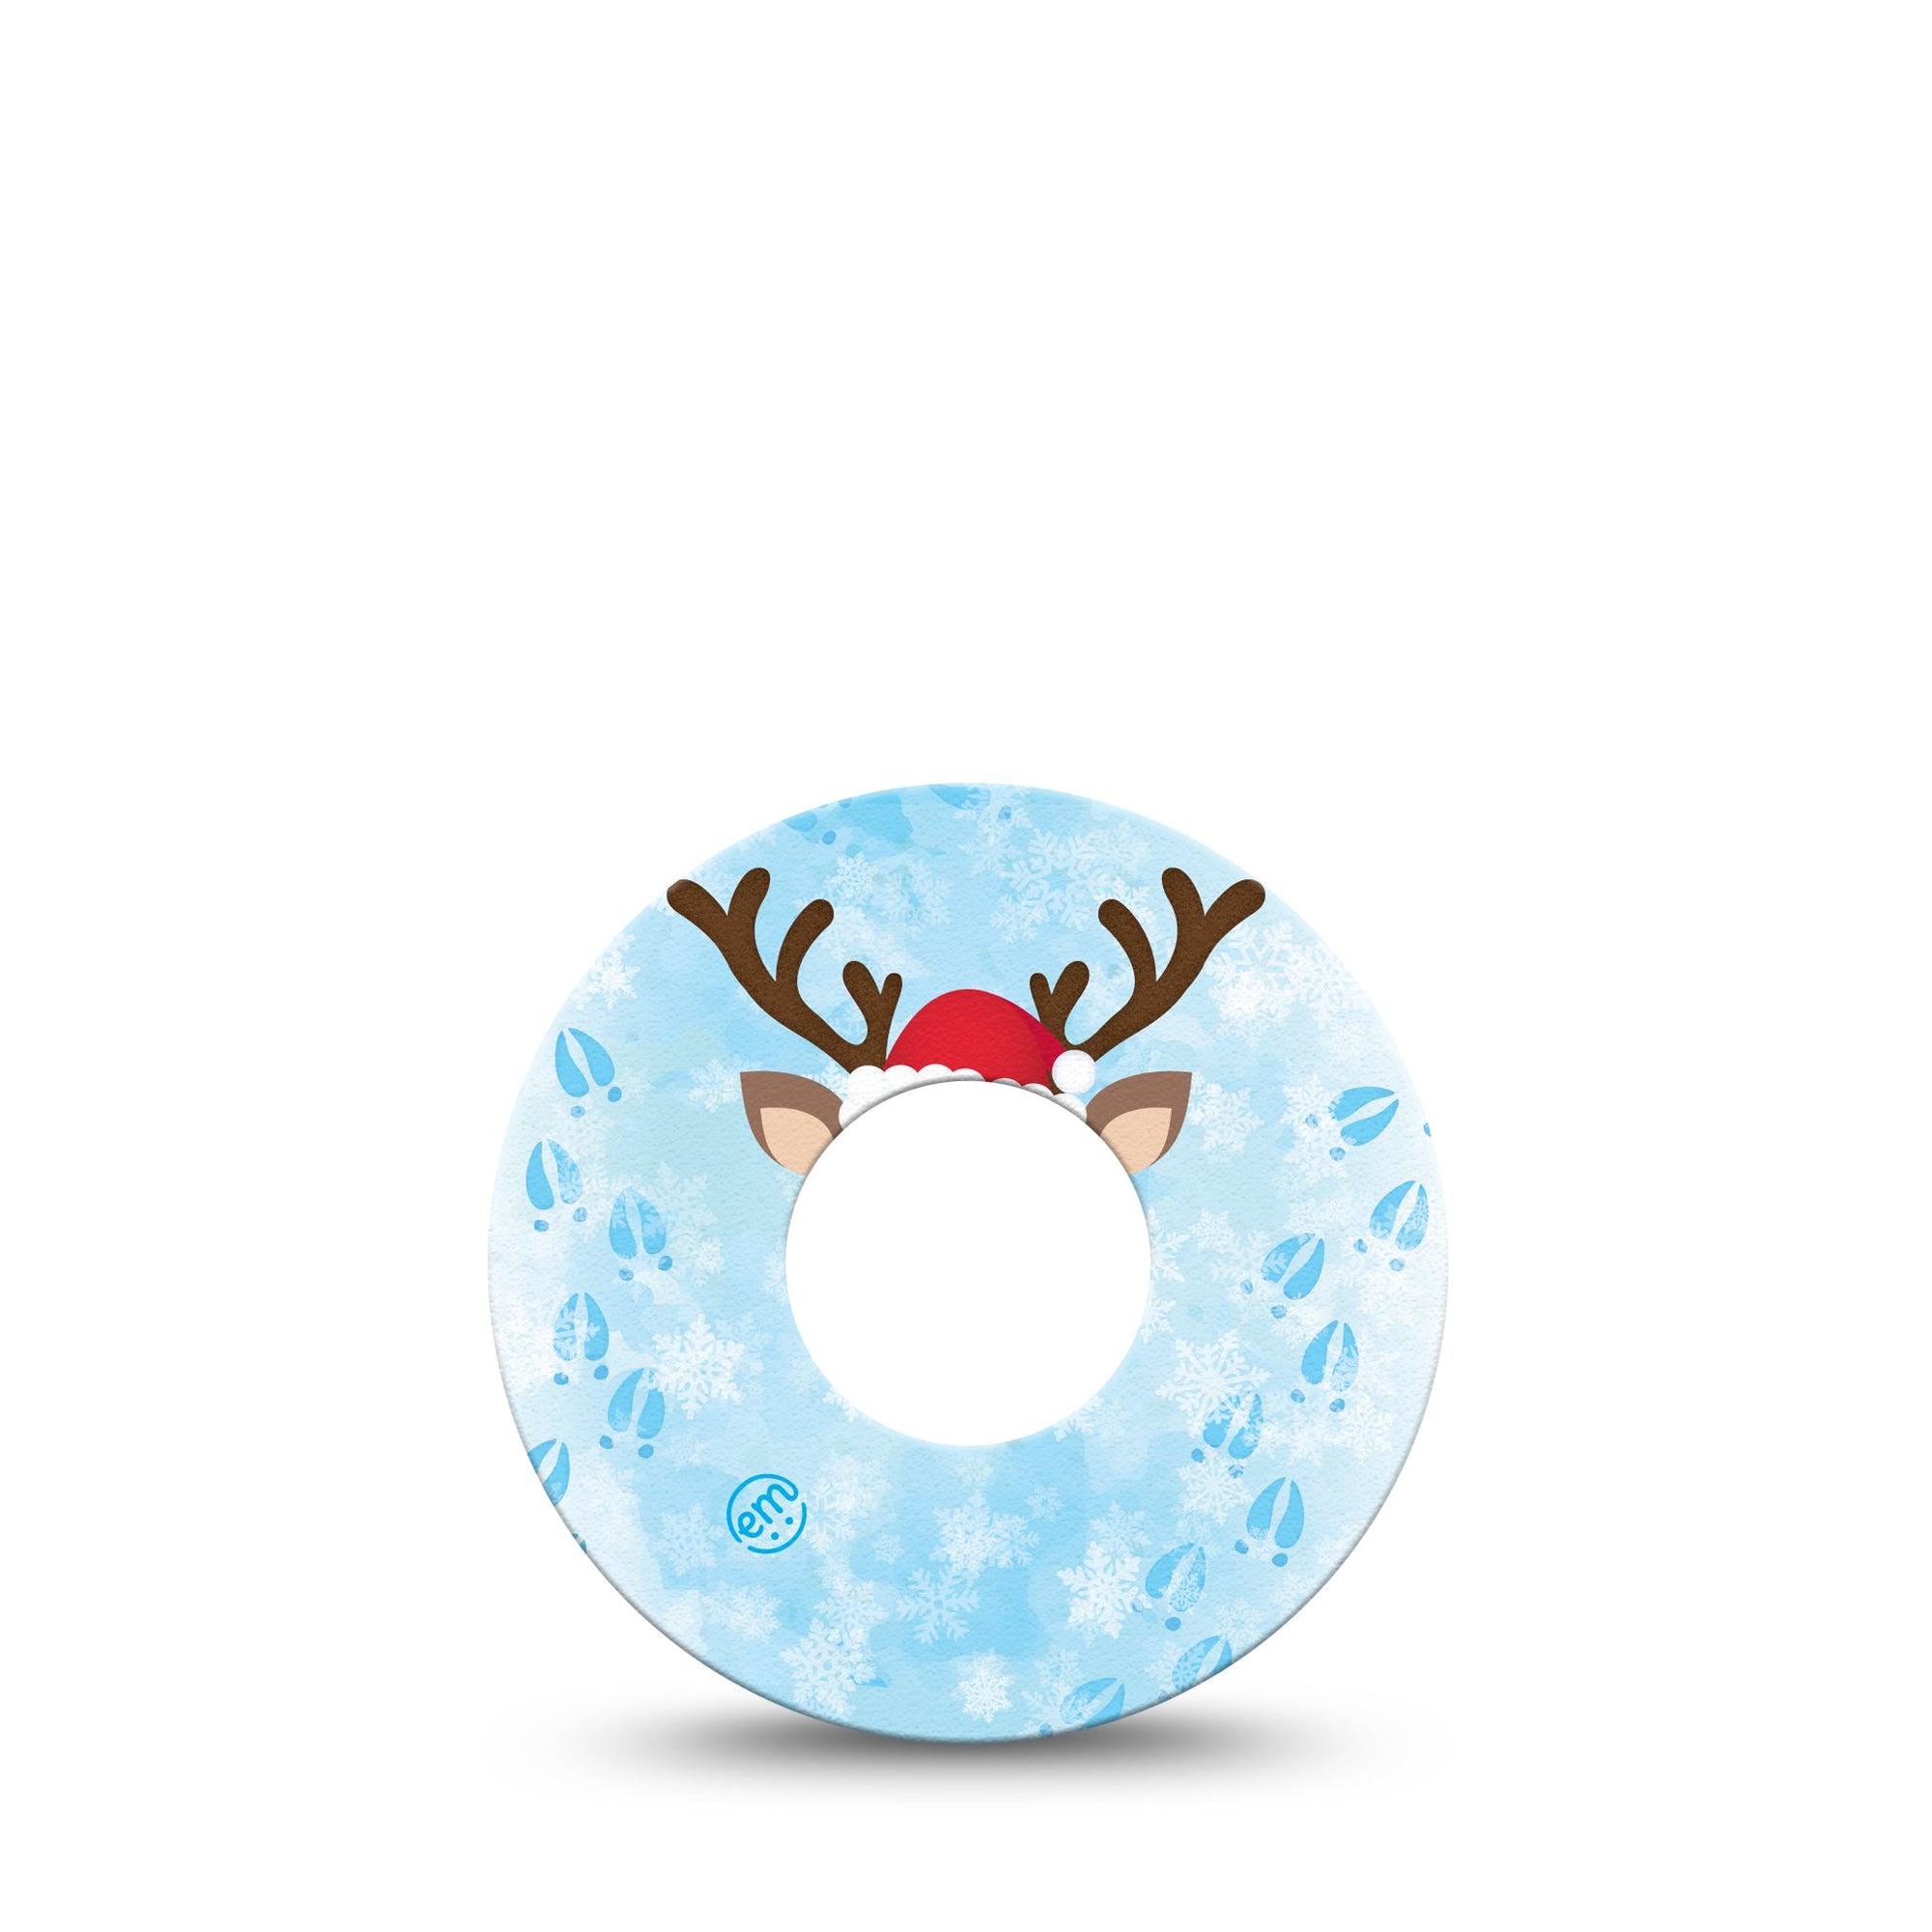 ExpressionMed Flurry the Reindeer Infusion Tape Snow and Antlers, CGM Overlay Patch Design